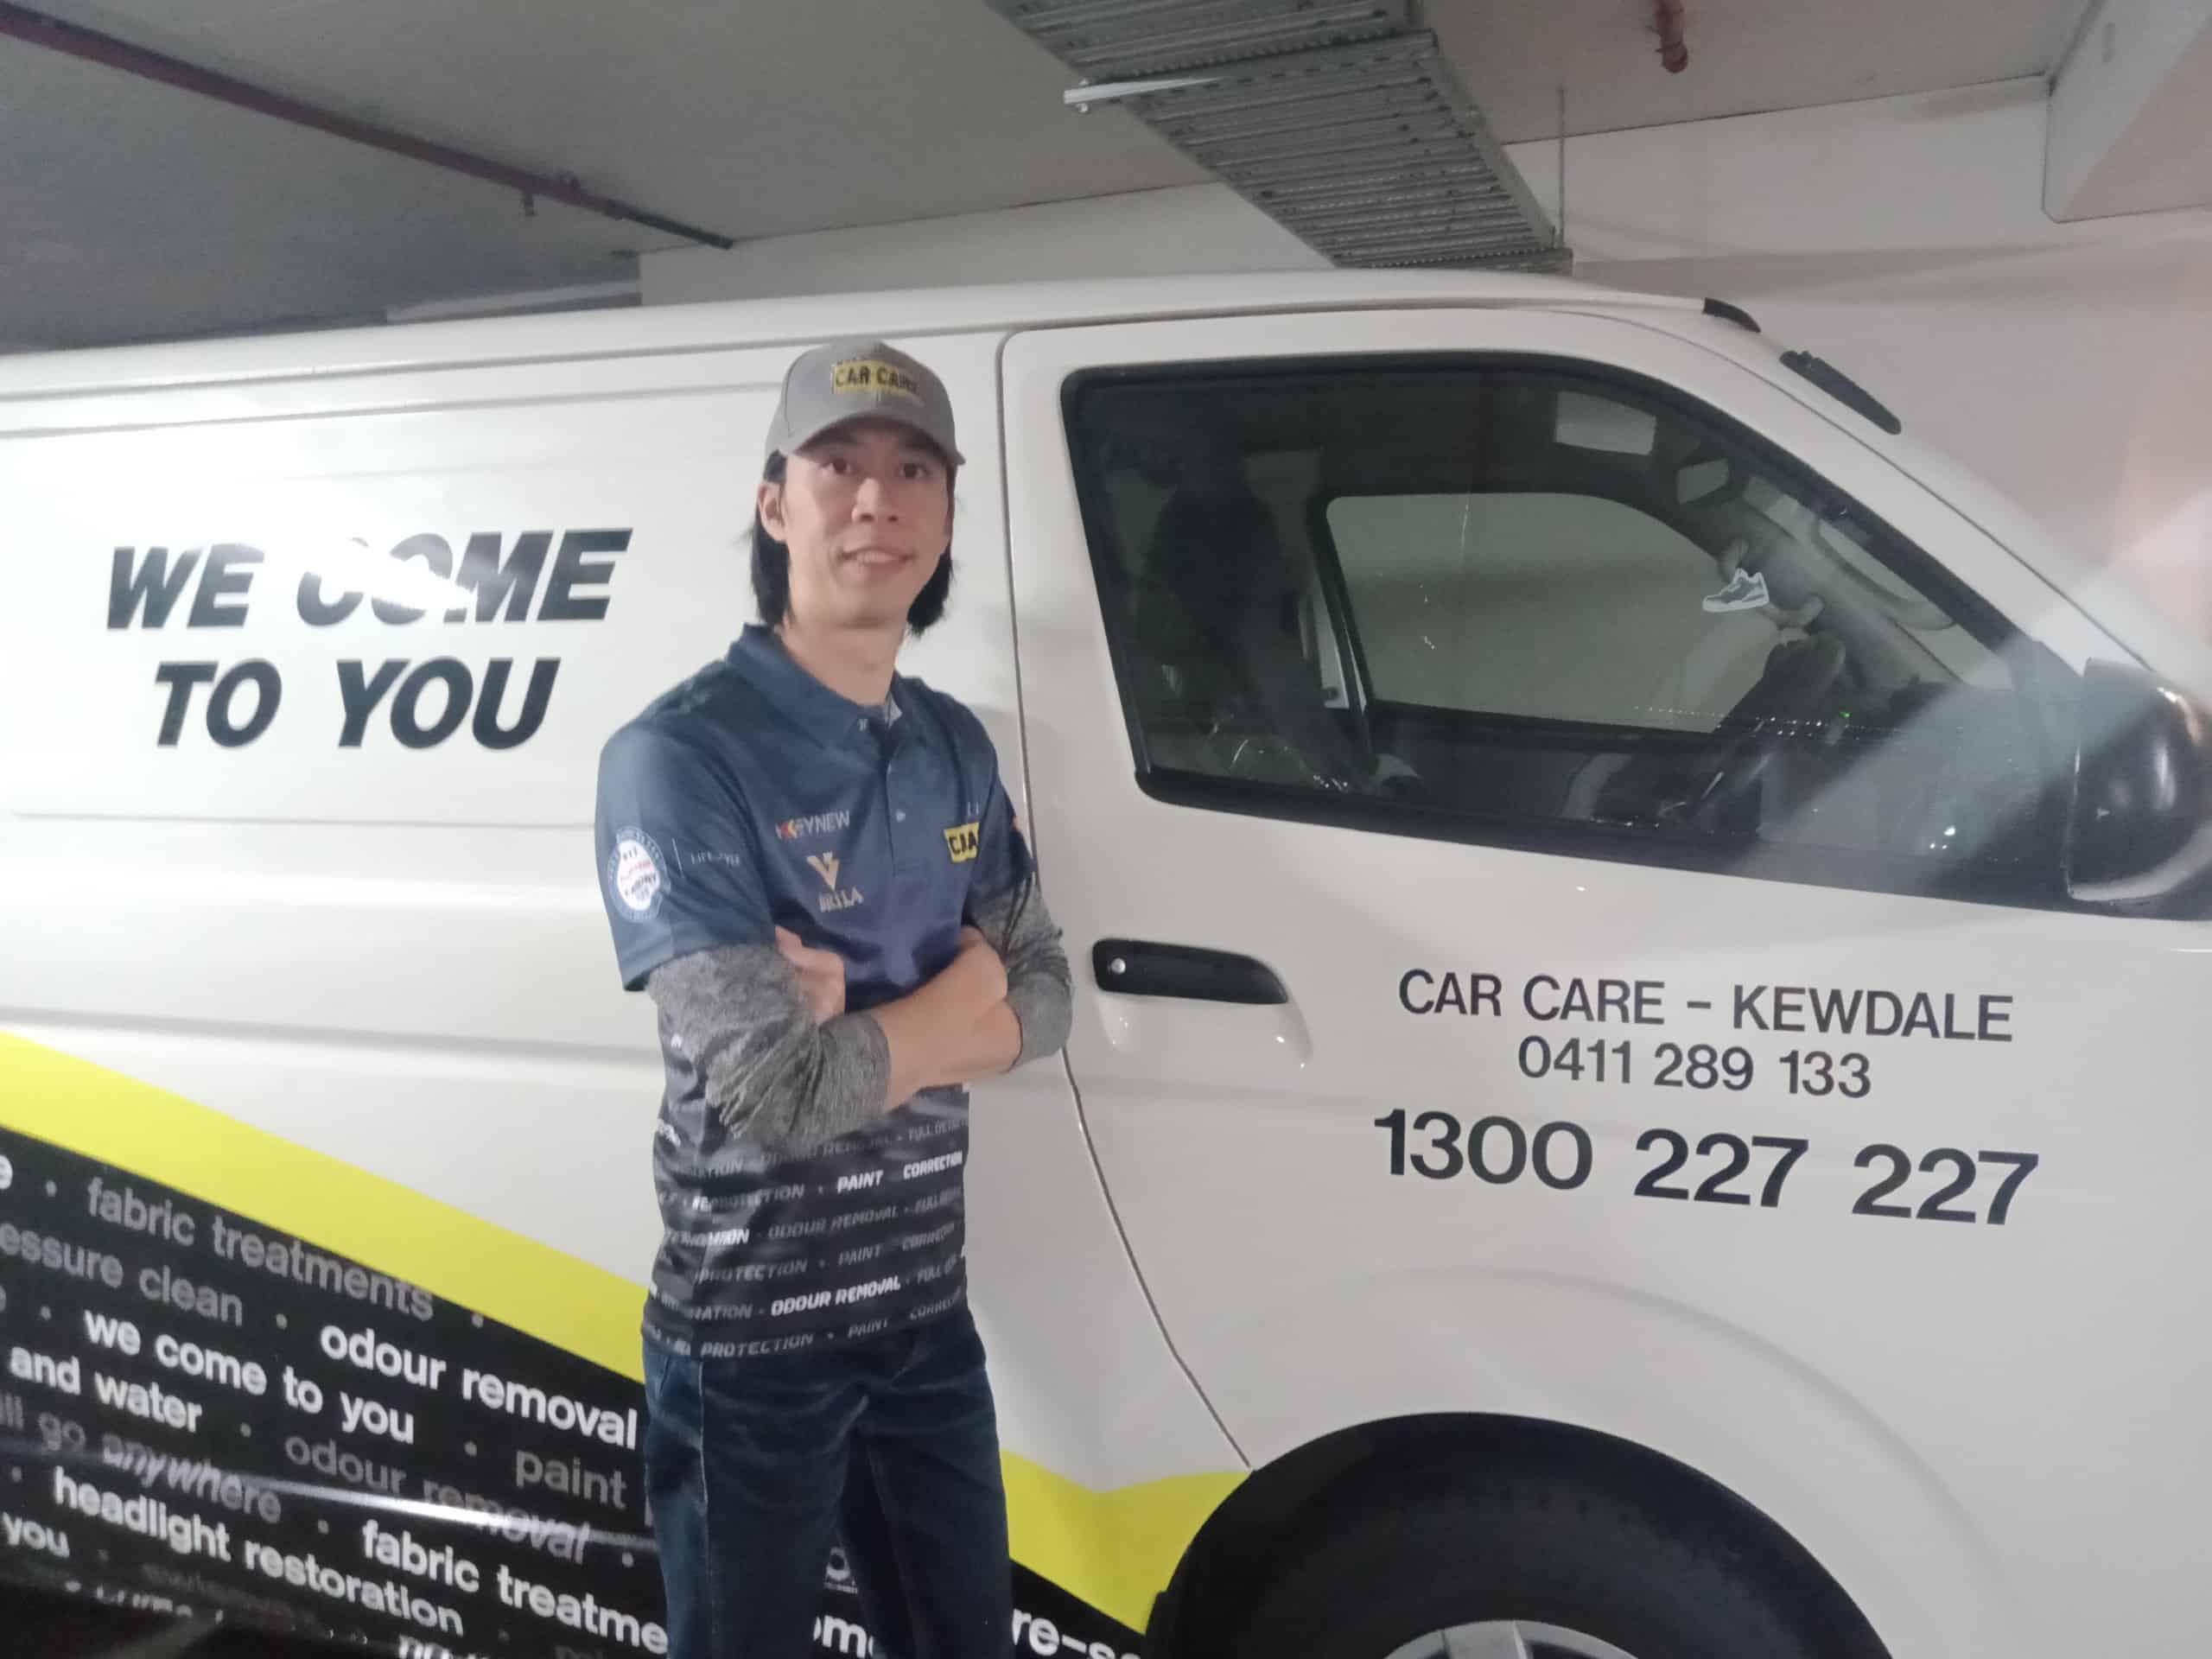 Dave car Care Kewdale in front of white van